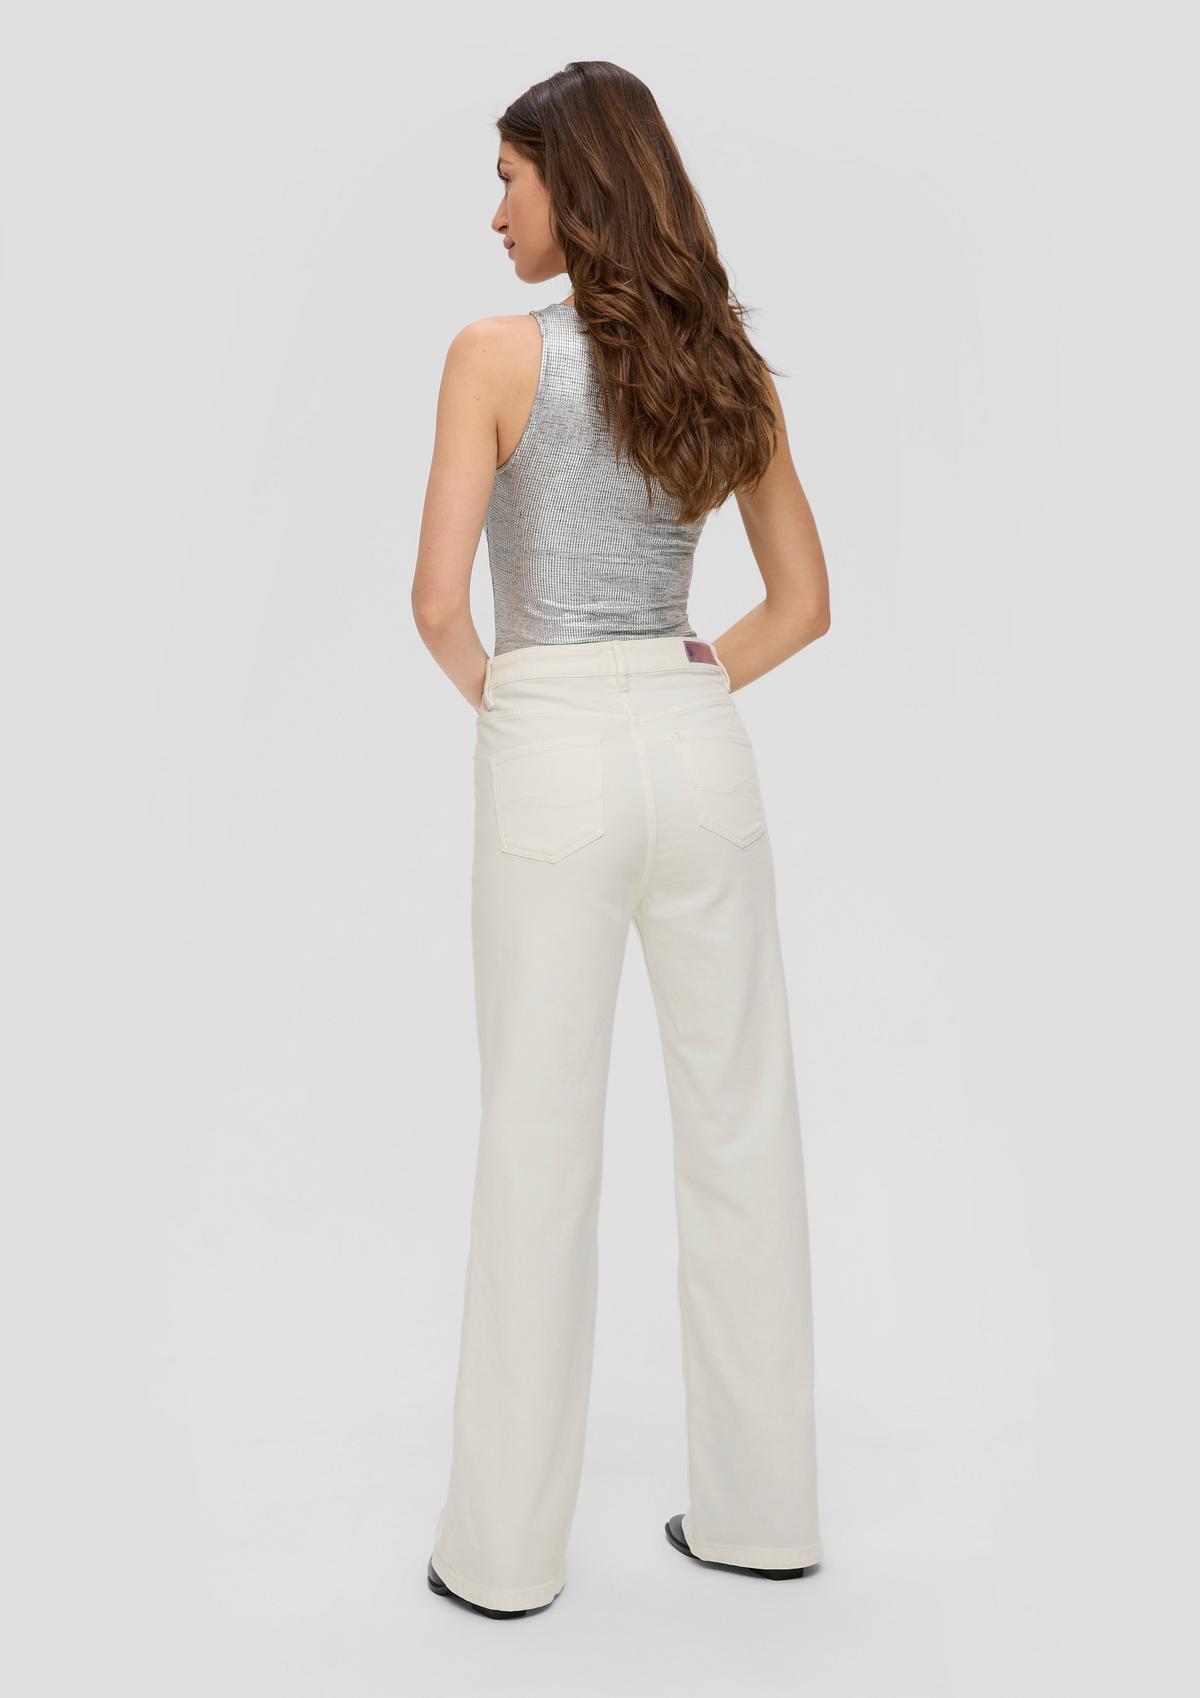 s.Oliver Jeans Catie / Slim Fit / High Rise / Wide Leg / Knopfleiste